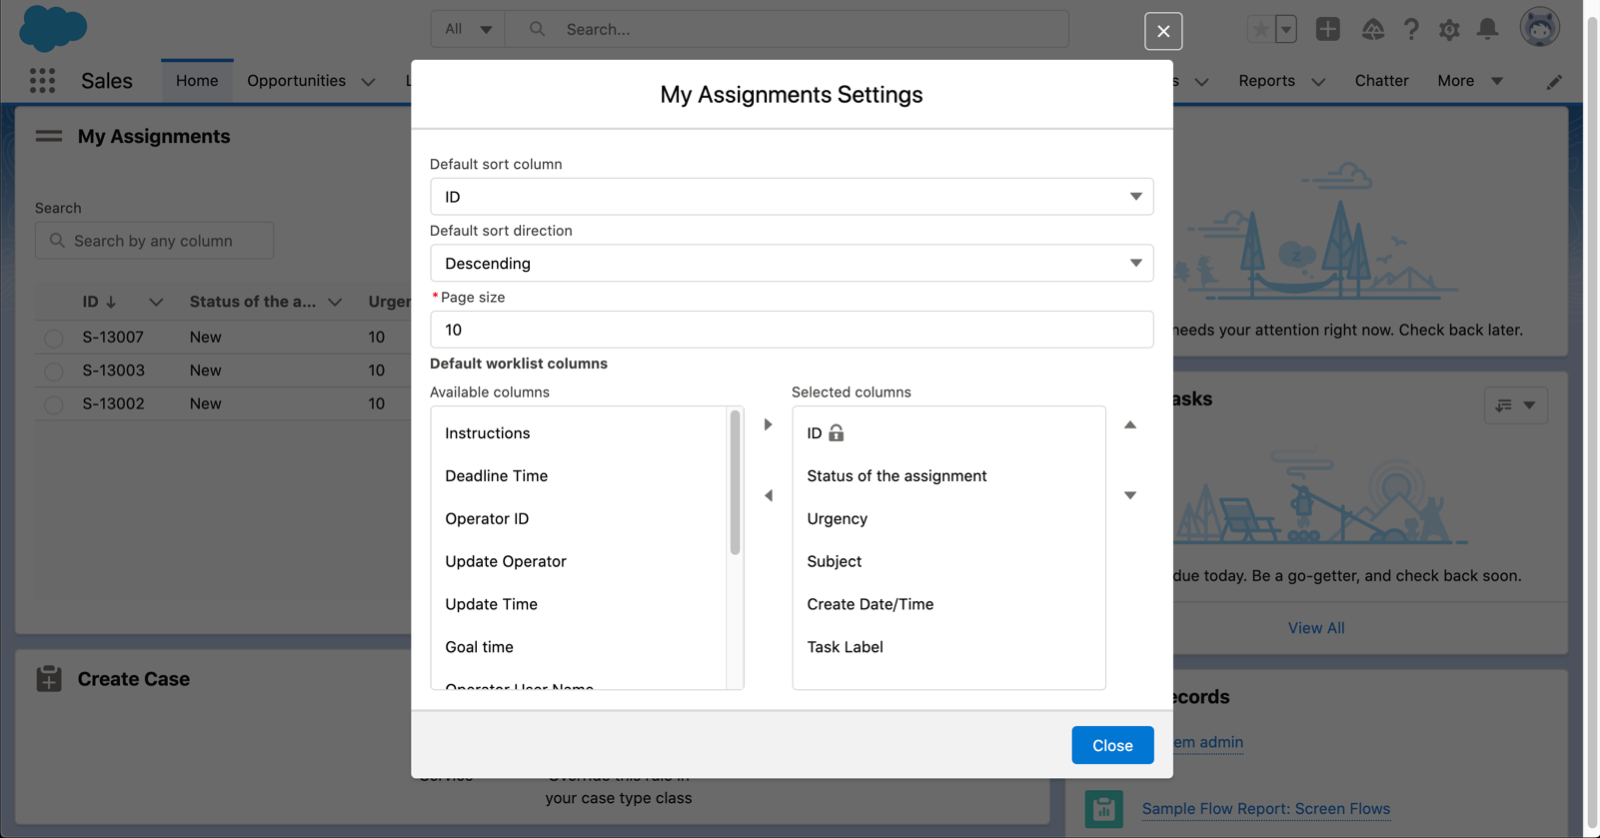 Figure showing the customization options available in the My Assignments component